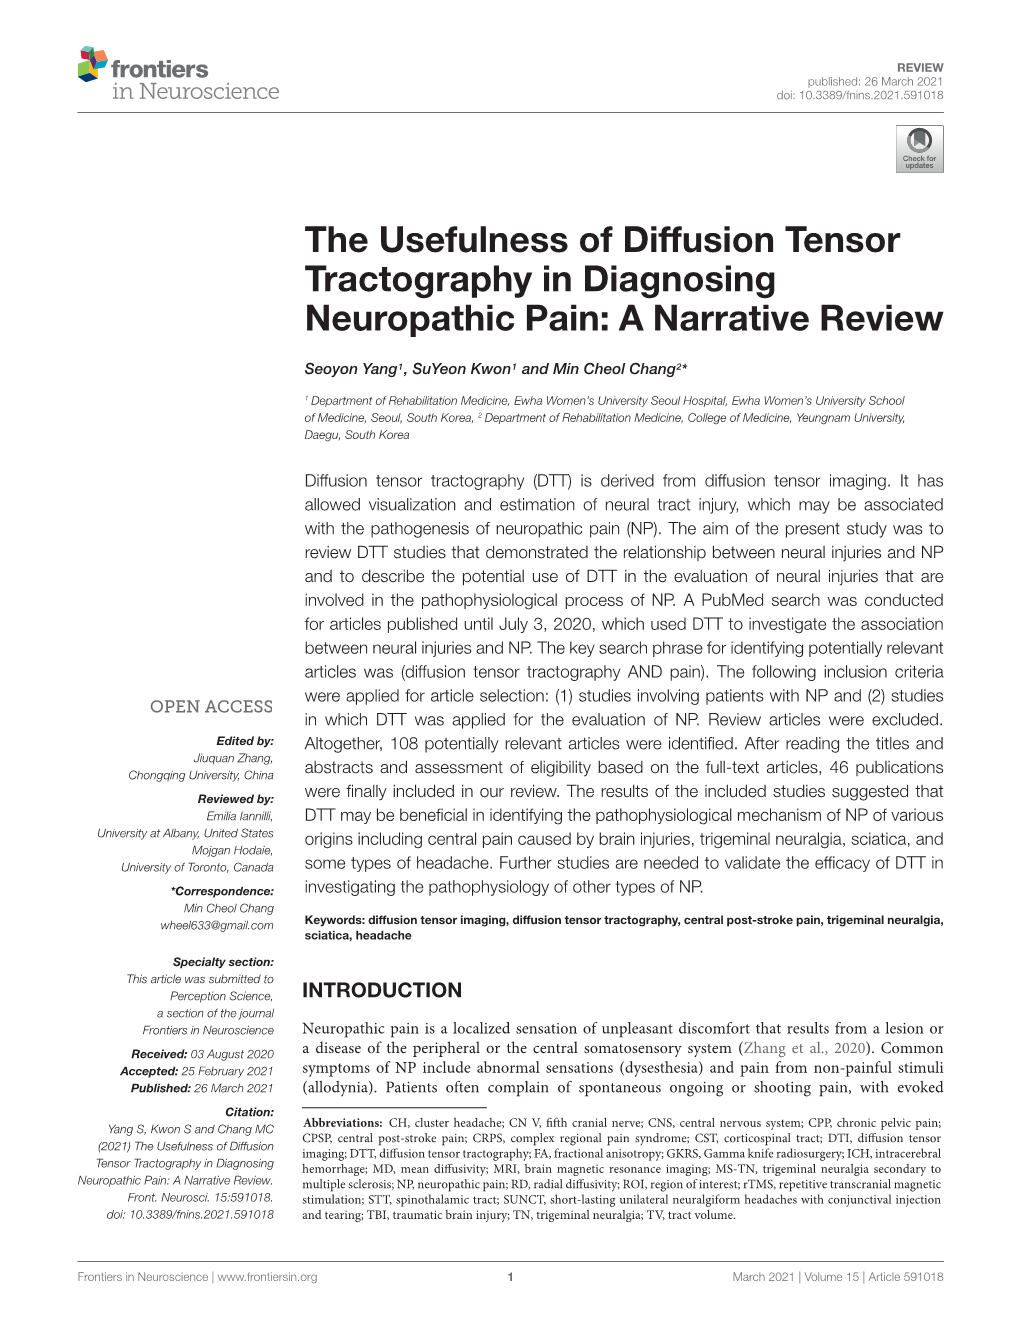 The Usefulness of Diffusion Tensor Tractography in Diagnosing Neuropathic Pain: a Narrative Review